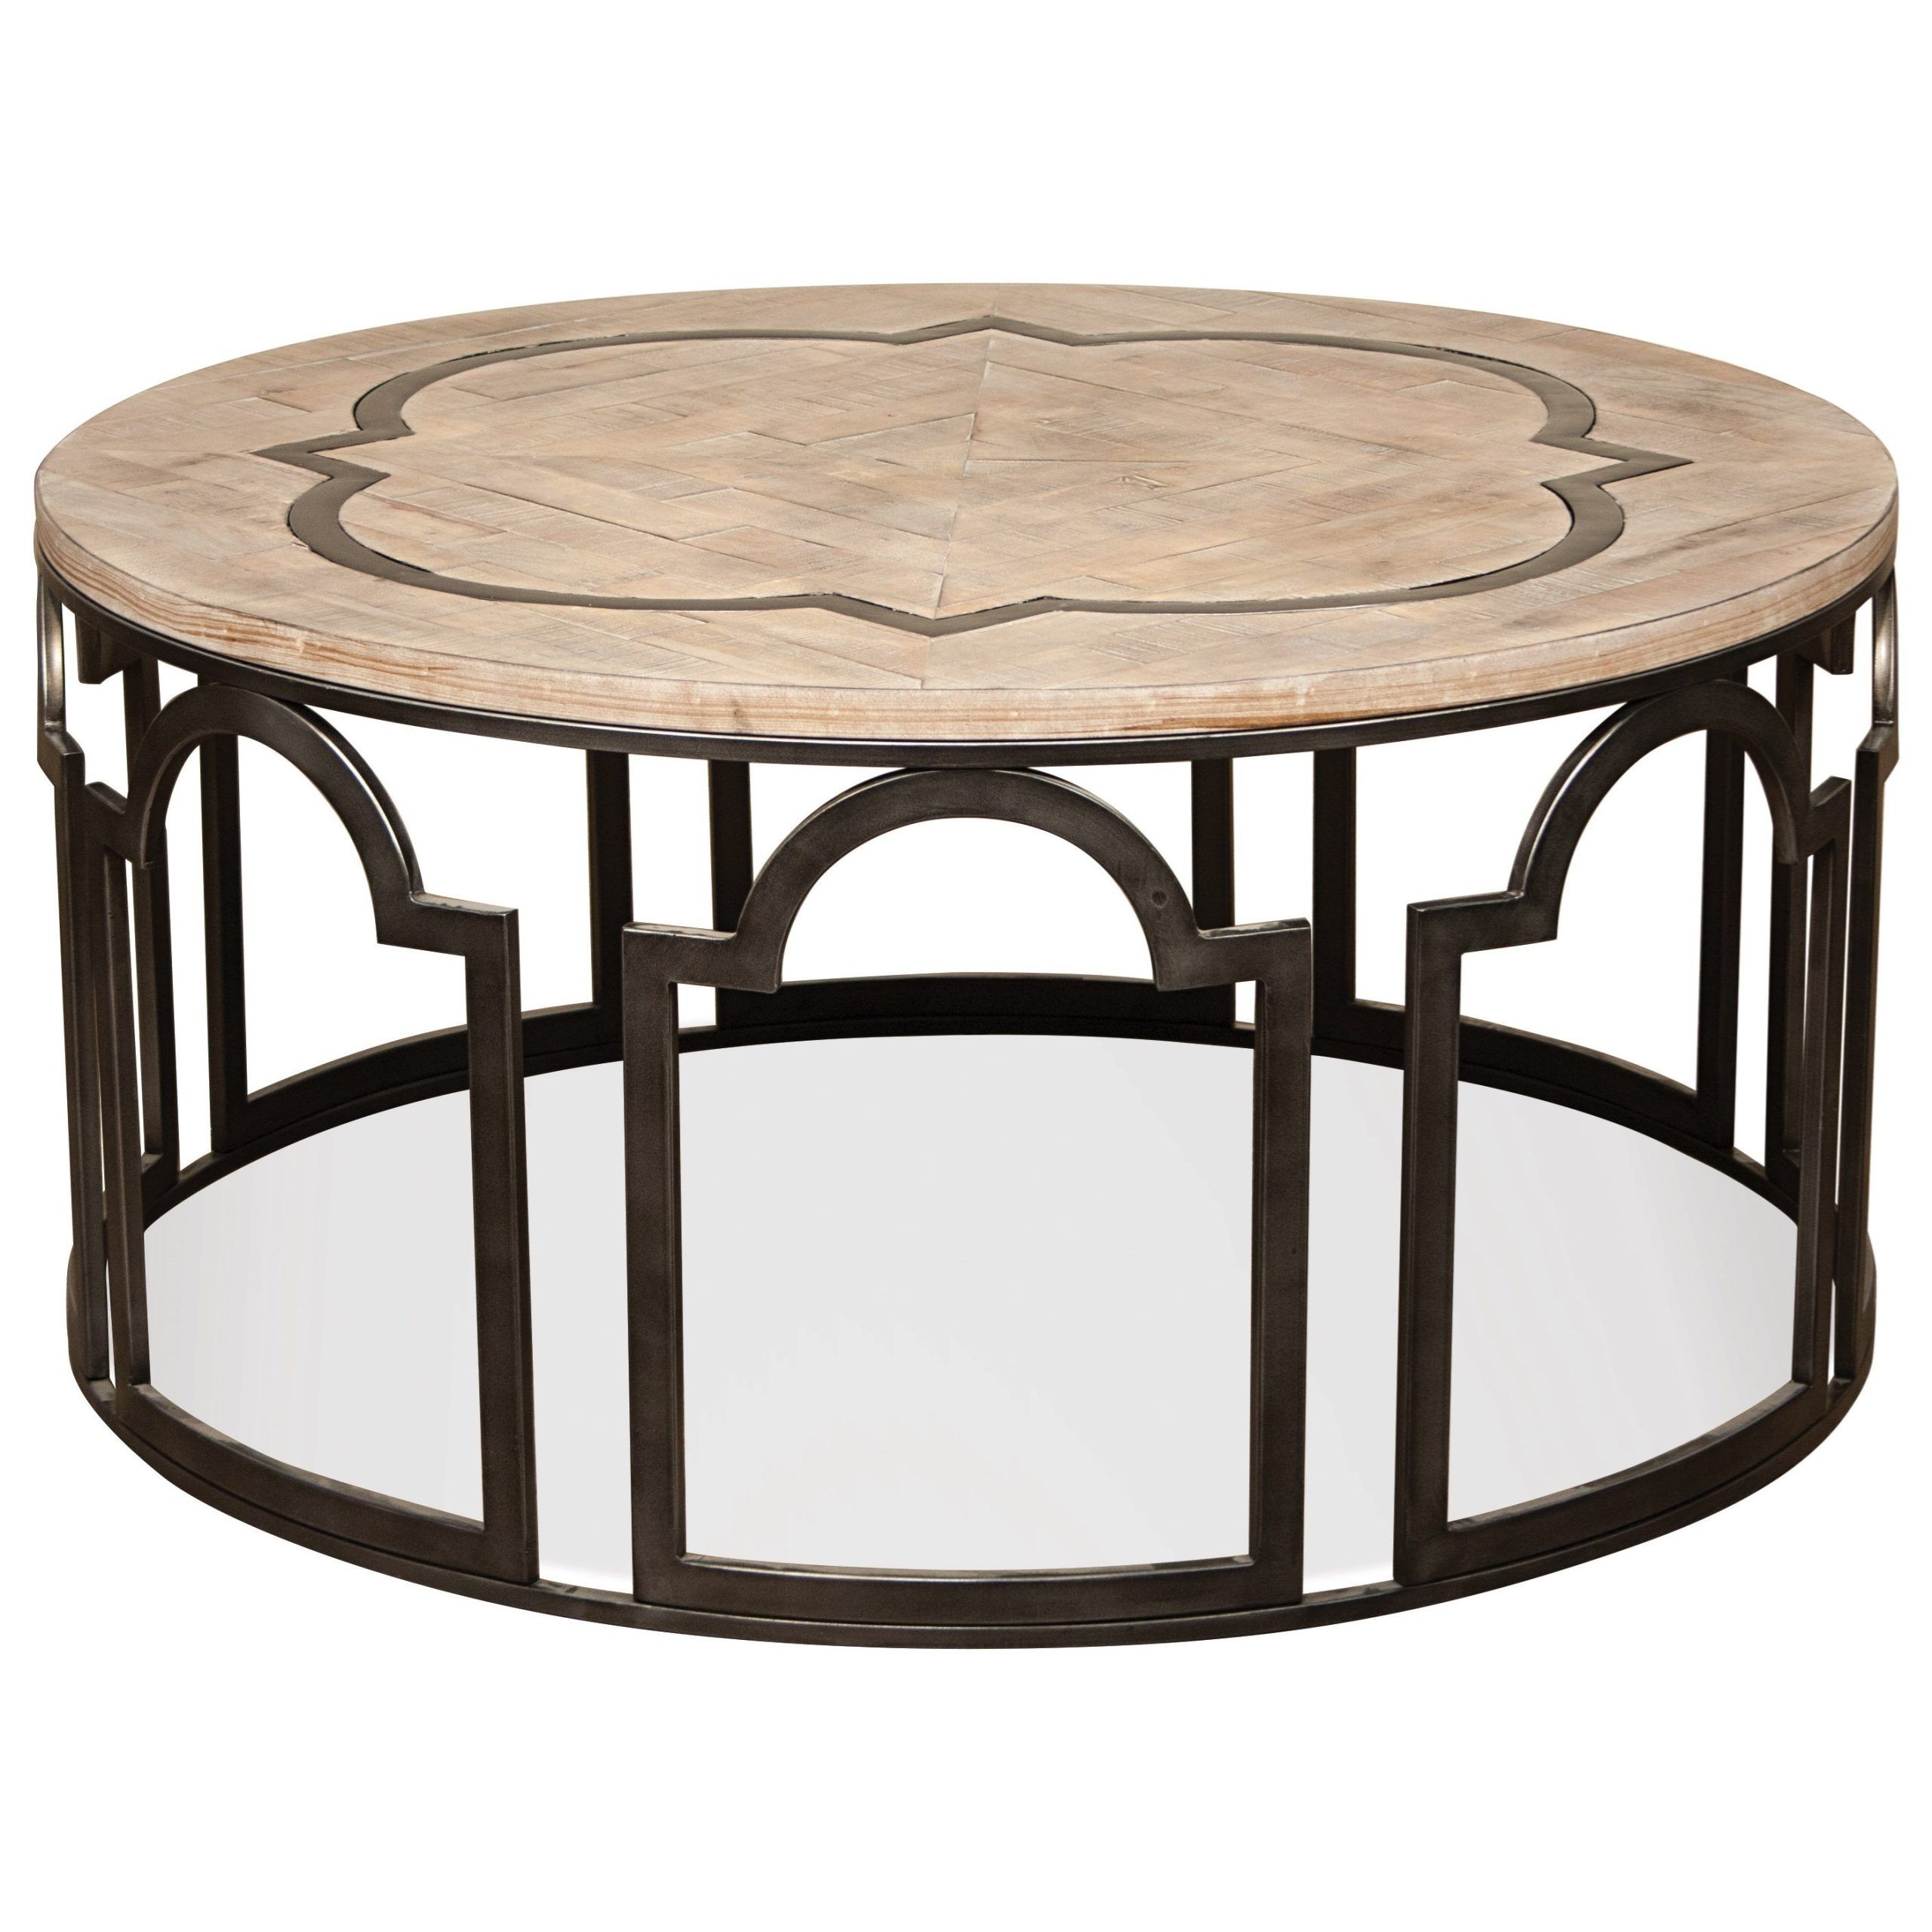 Riverside Furniture Estelle 20102 Contemporary Rustic Round Cocktail In Gray Coastal Cocktail Tables (Gallery 17 of 22)